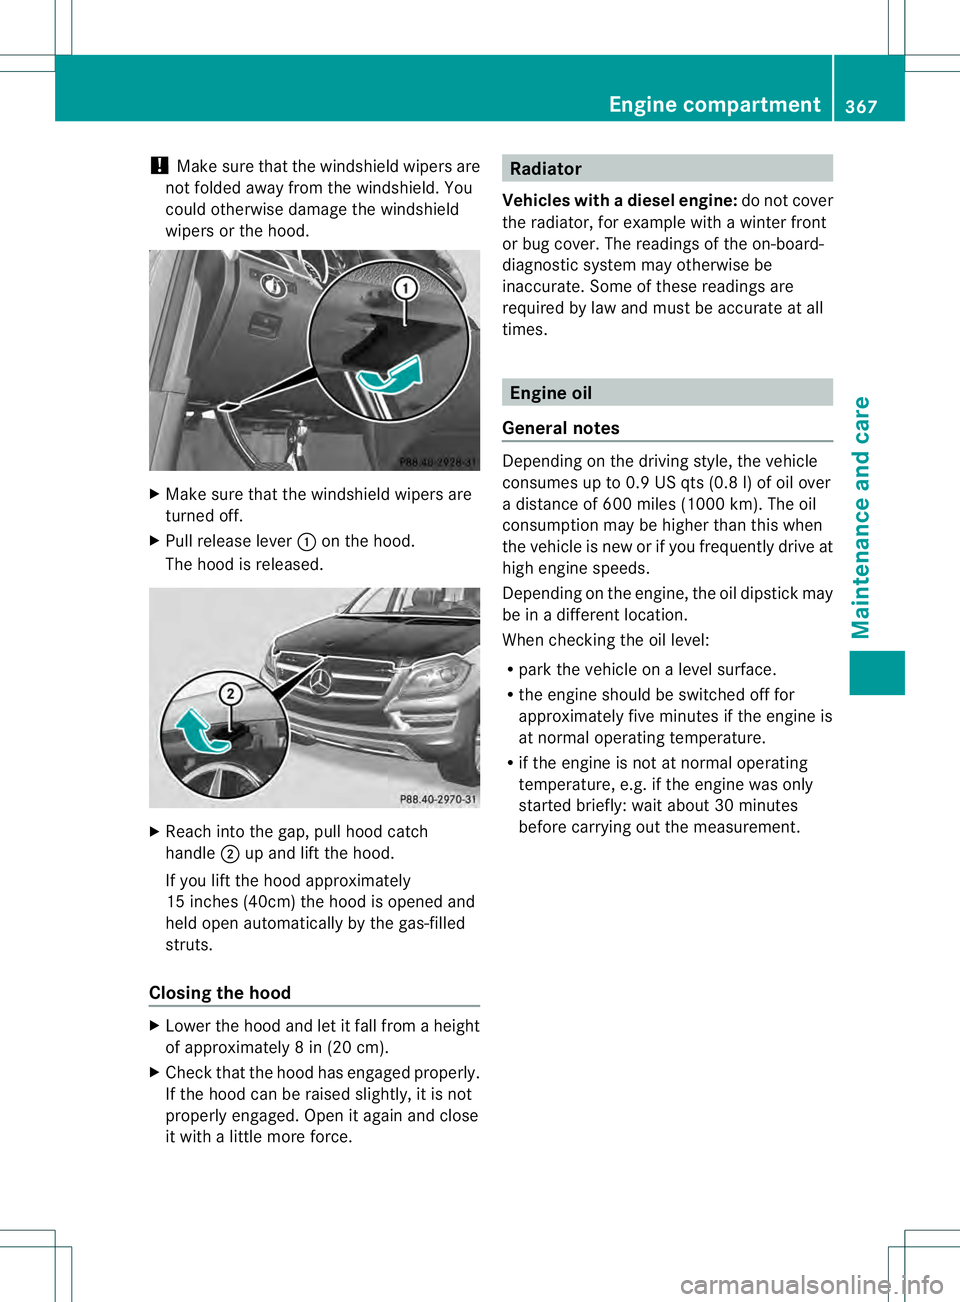 MERCEDES-BENZ GL 2013  Owners Manual !
Make sure that the windshieldw ipers are
not folded away fro mthe windshield. You
could otherwise damage the windshield
wipers or the hood. X
Make sure that the windshield wipers are
turned off.
X P